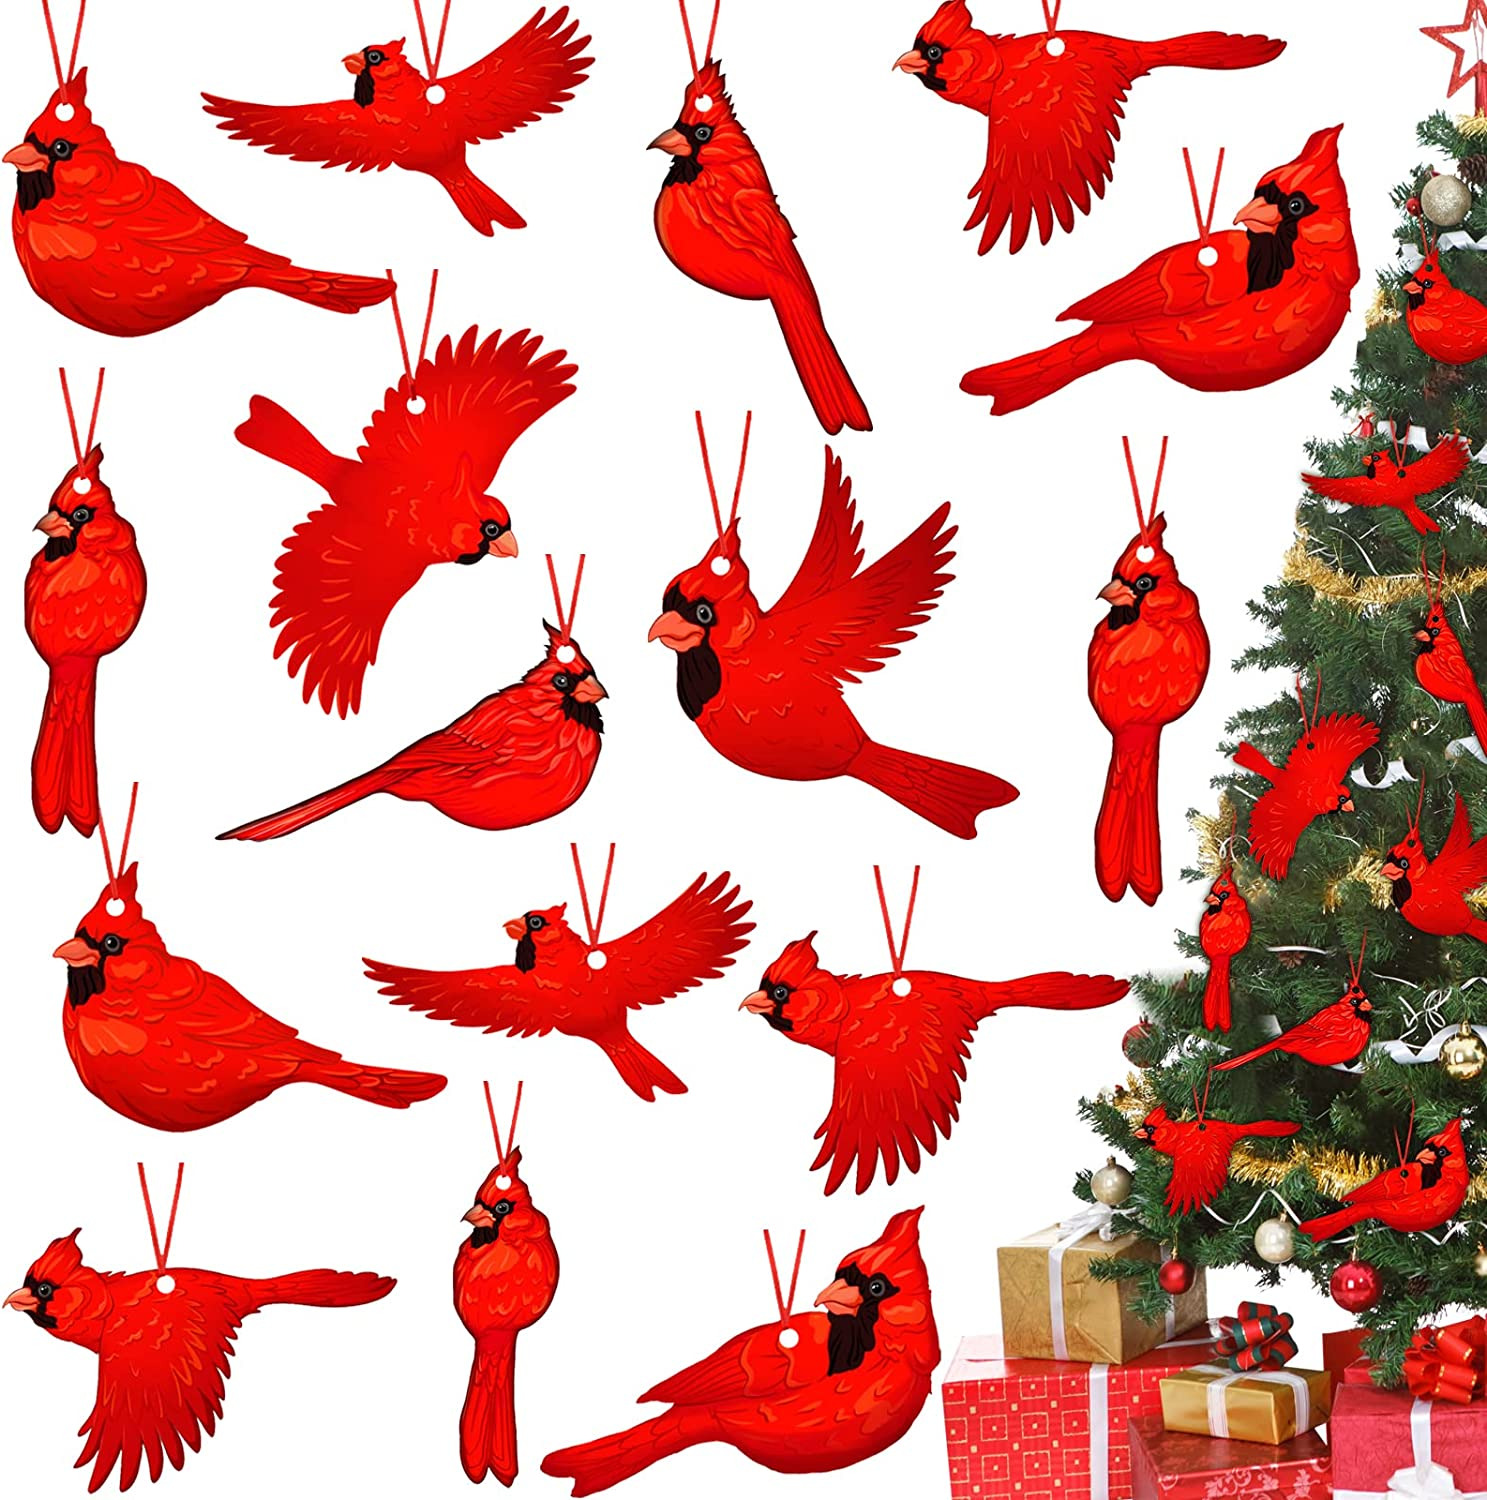 36 Pieces Red Cardinal Christmas Ornaments Red Christmas Tree Ornaments Cardinal